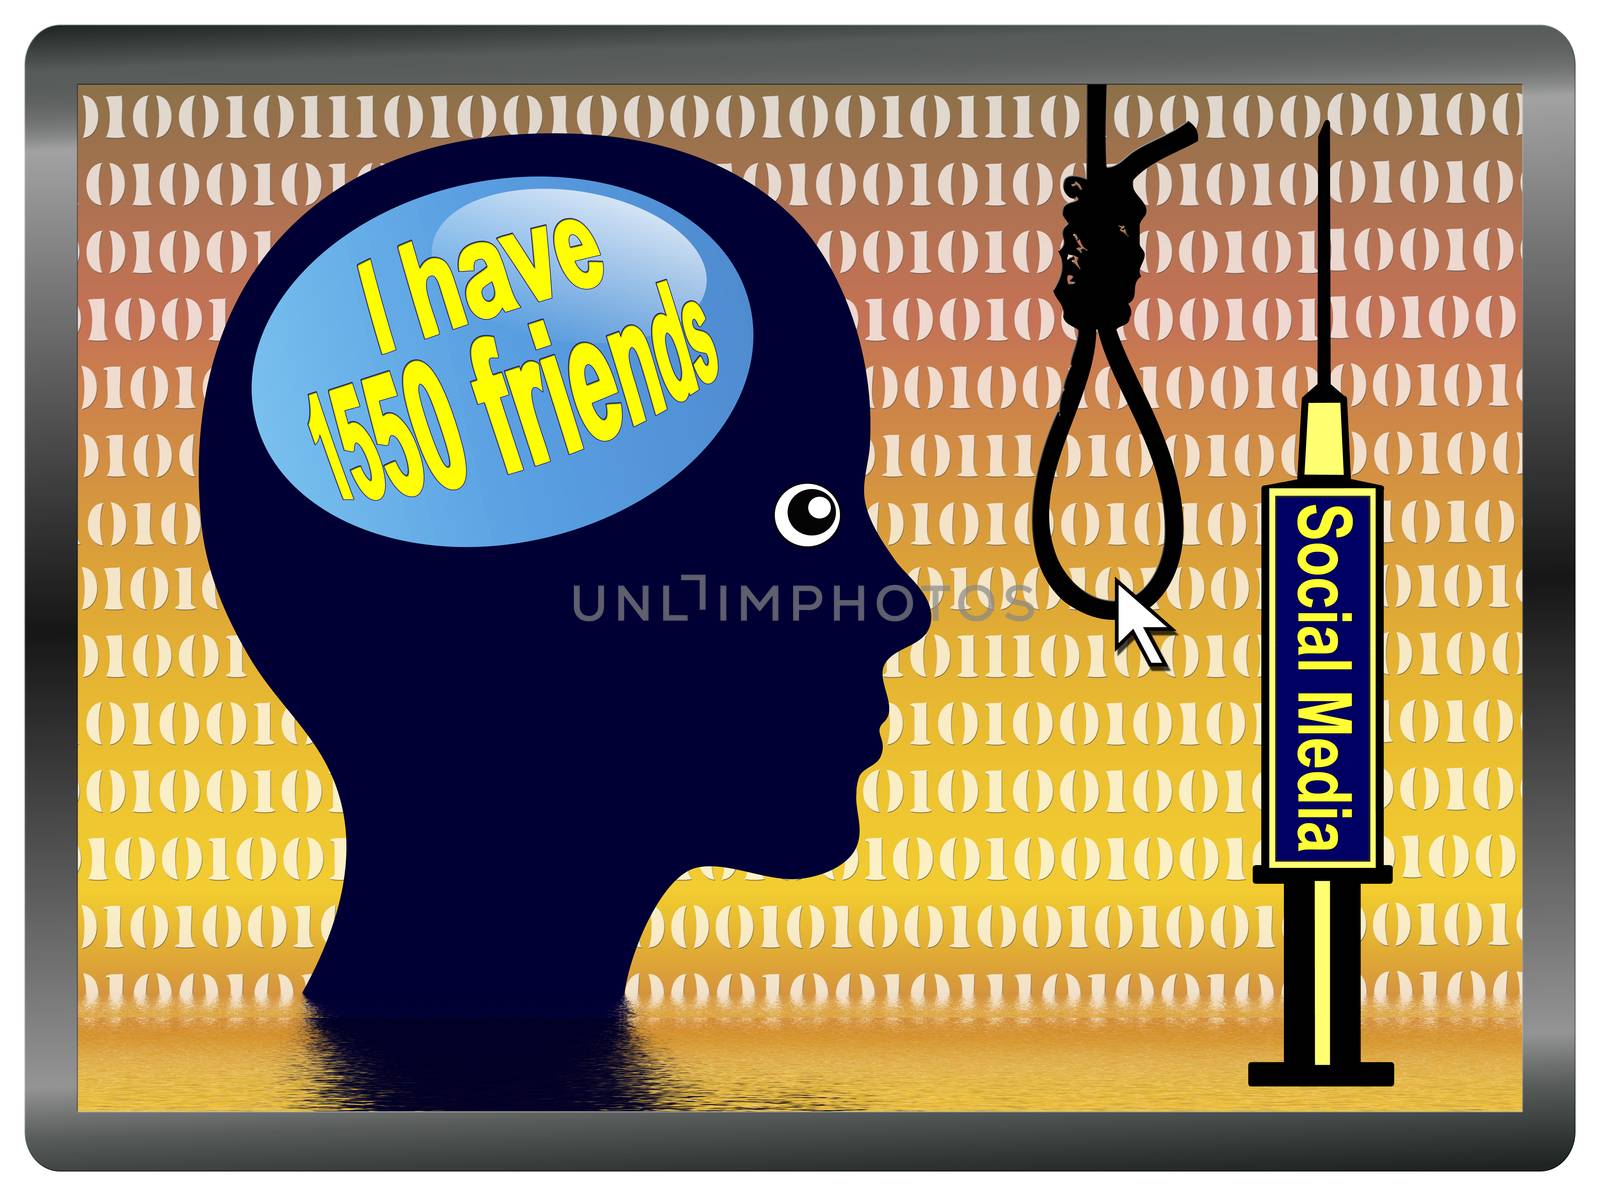 Social Network is turning a world of make believe with illusory friends which can lead to depressive disorder